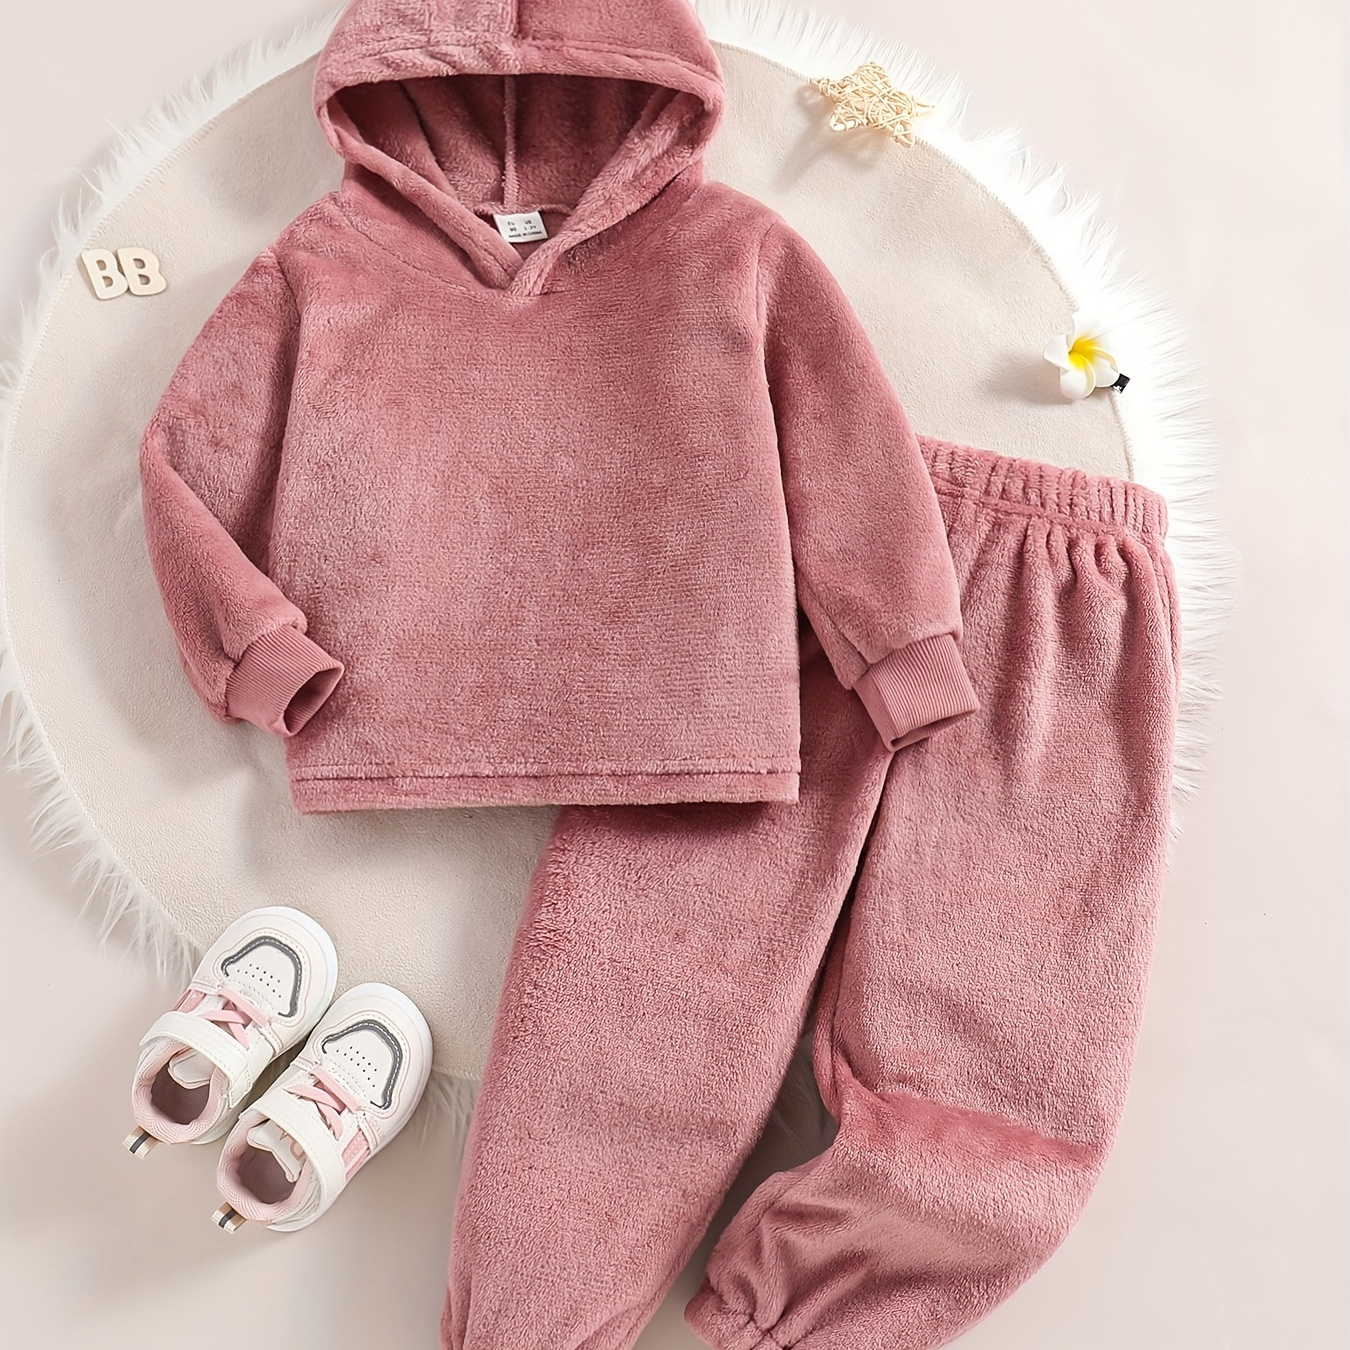 

Girl's Fleece Loungewear 2pcs, Long Sleeve Hoodie Top & Pants Set, Solid Color Soft Casual Pj Outfits, Kids Clothes For Spring Fall